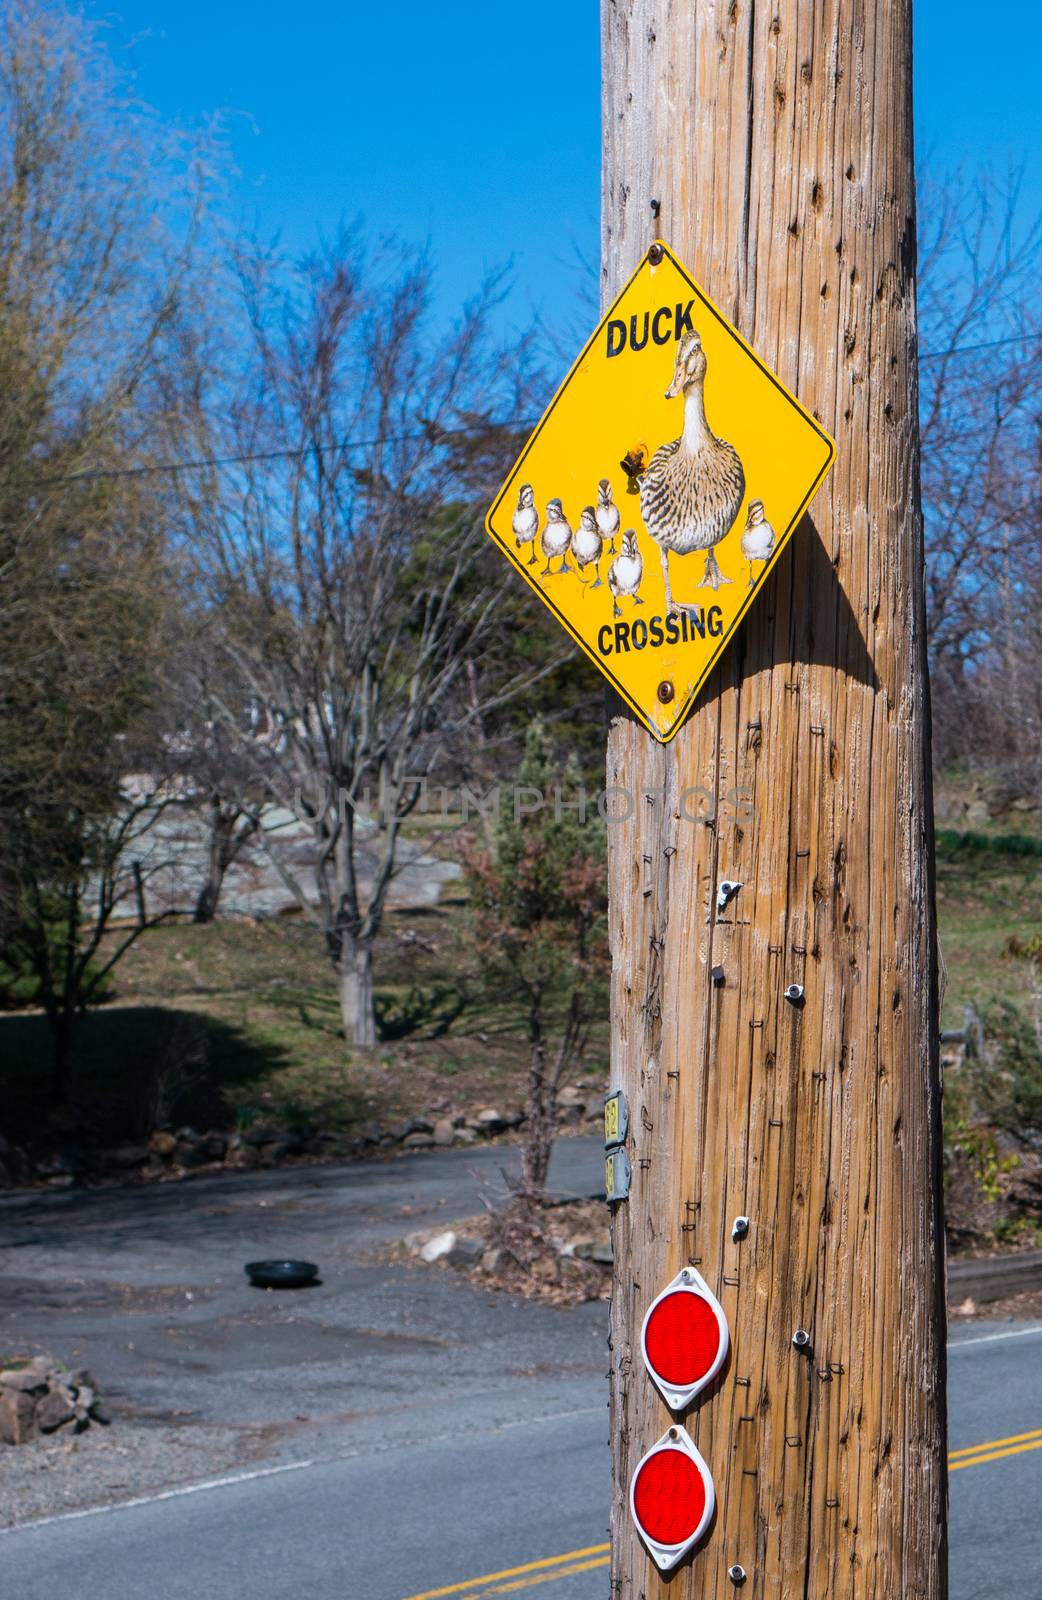 Attention! Duck crossing road sign by wit_gorski